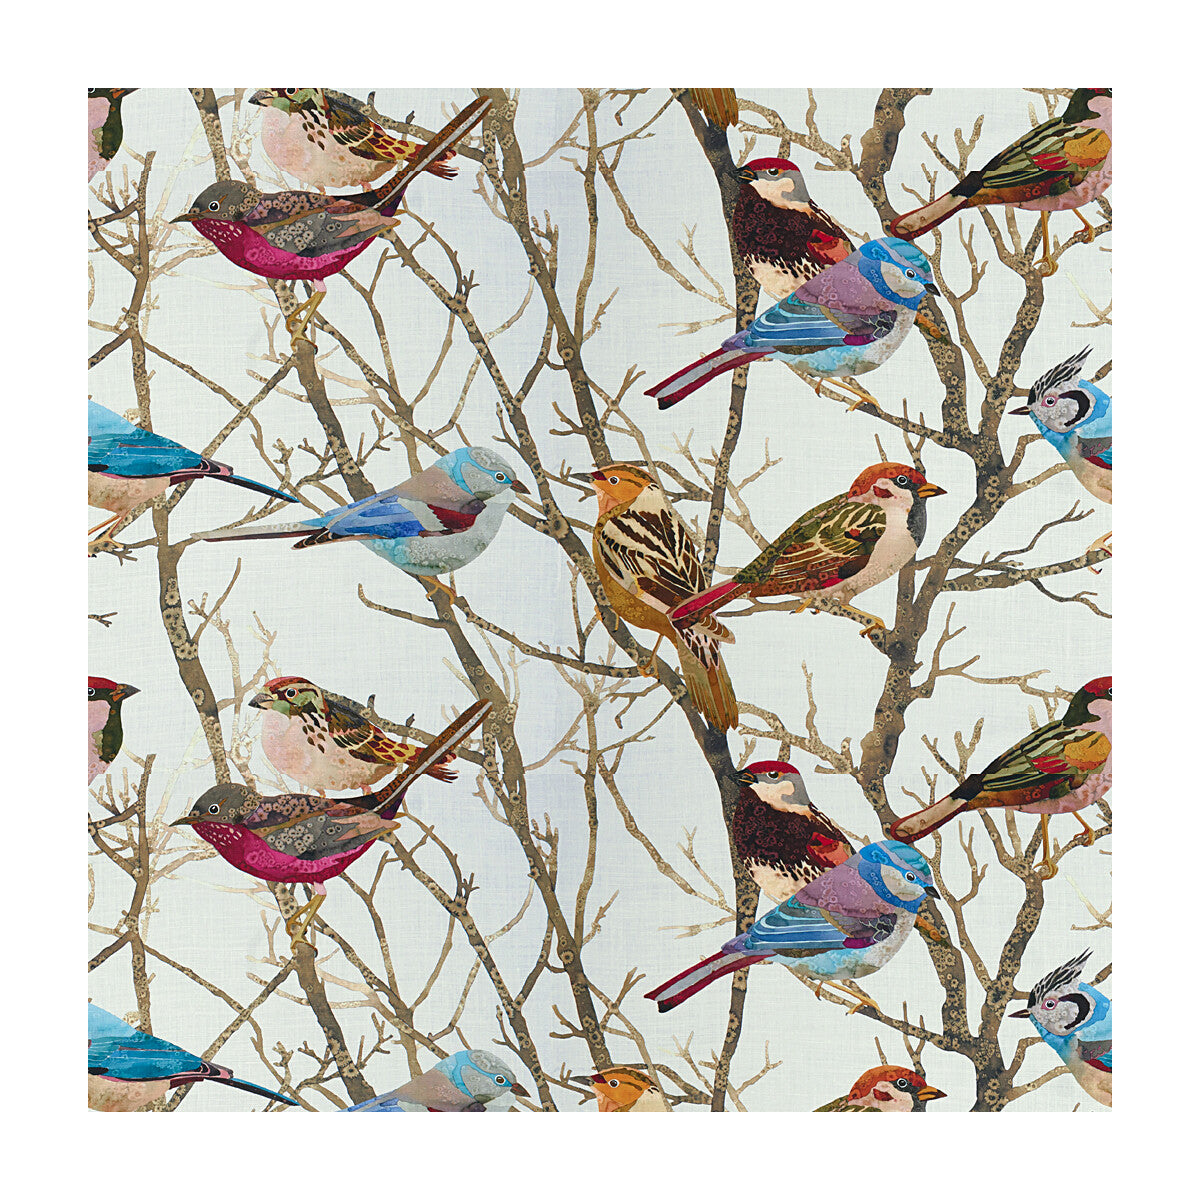 Kravet Couture fabric in sparrows2-916 color - pattern SPARROWS2.916.0 - by Kravet Couture